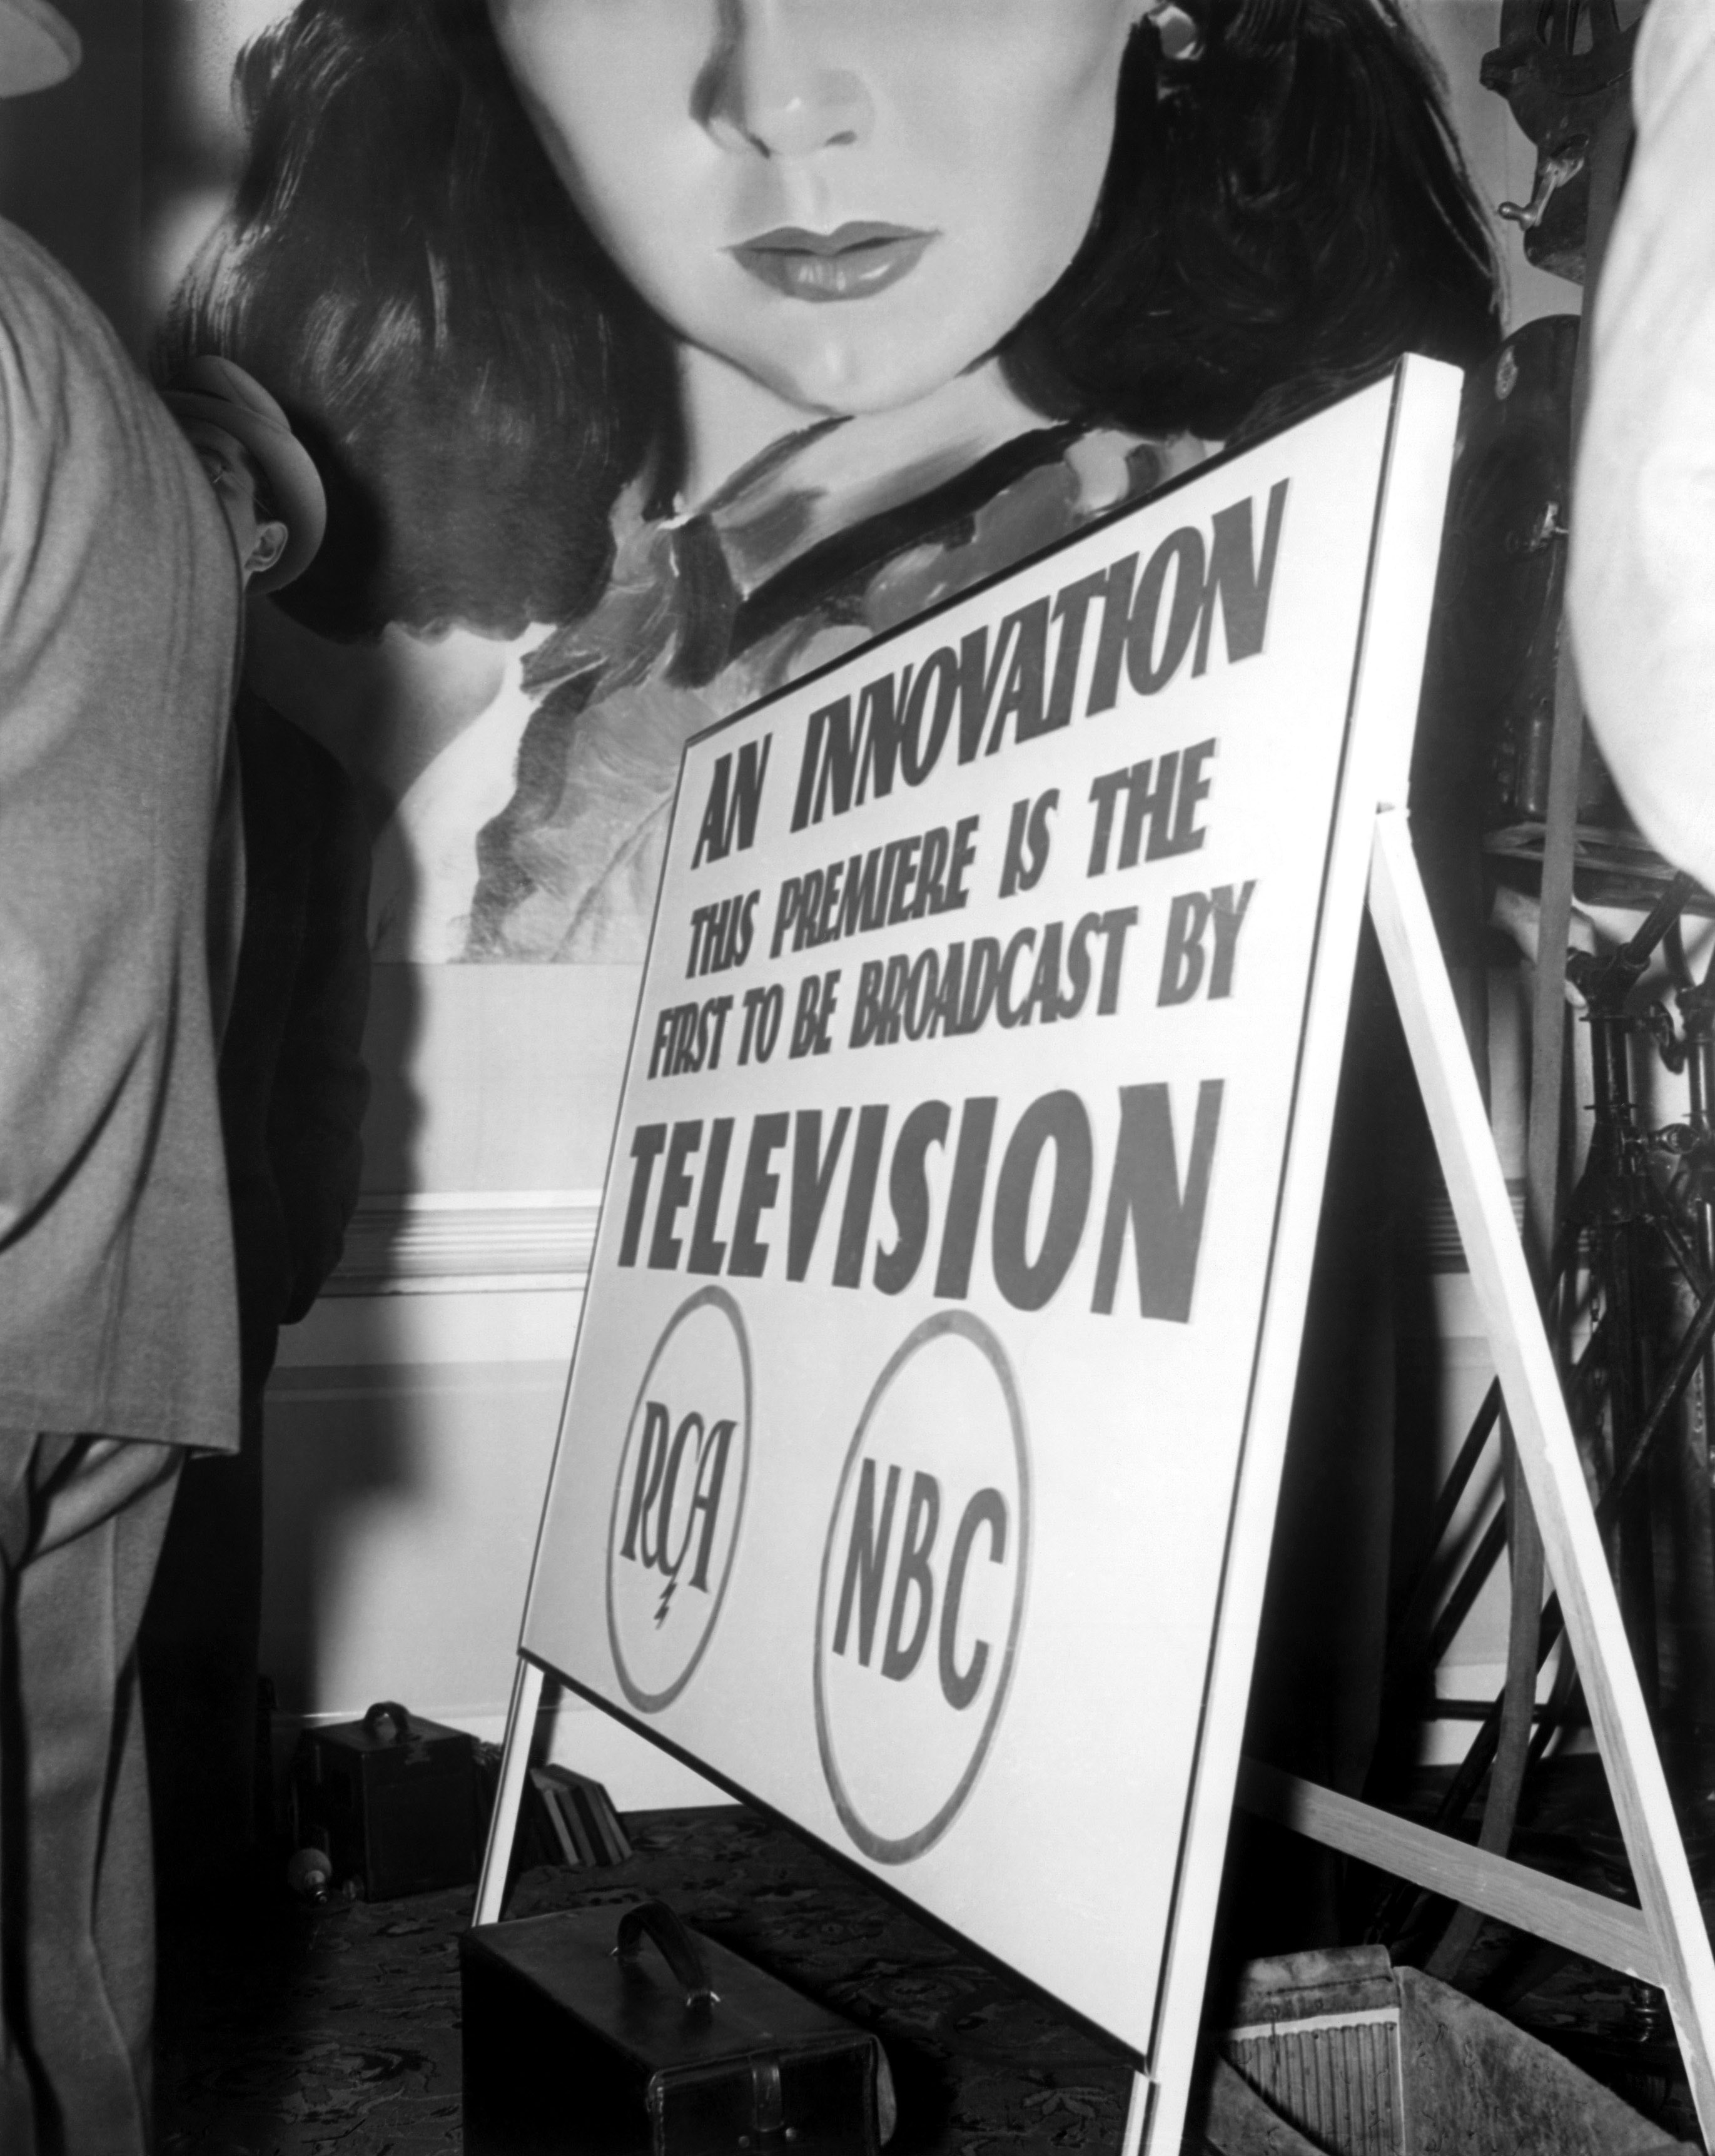 Poster with text: &quot;An innovation. This premiere is the first to be broadcast by television&quot; featuring RCA and NBC logos, and a drawing of a woman&#x27;s face